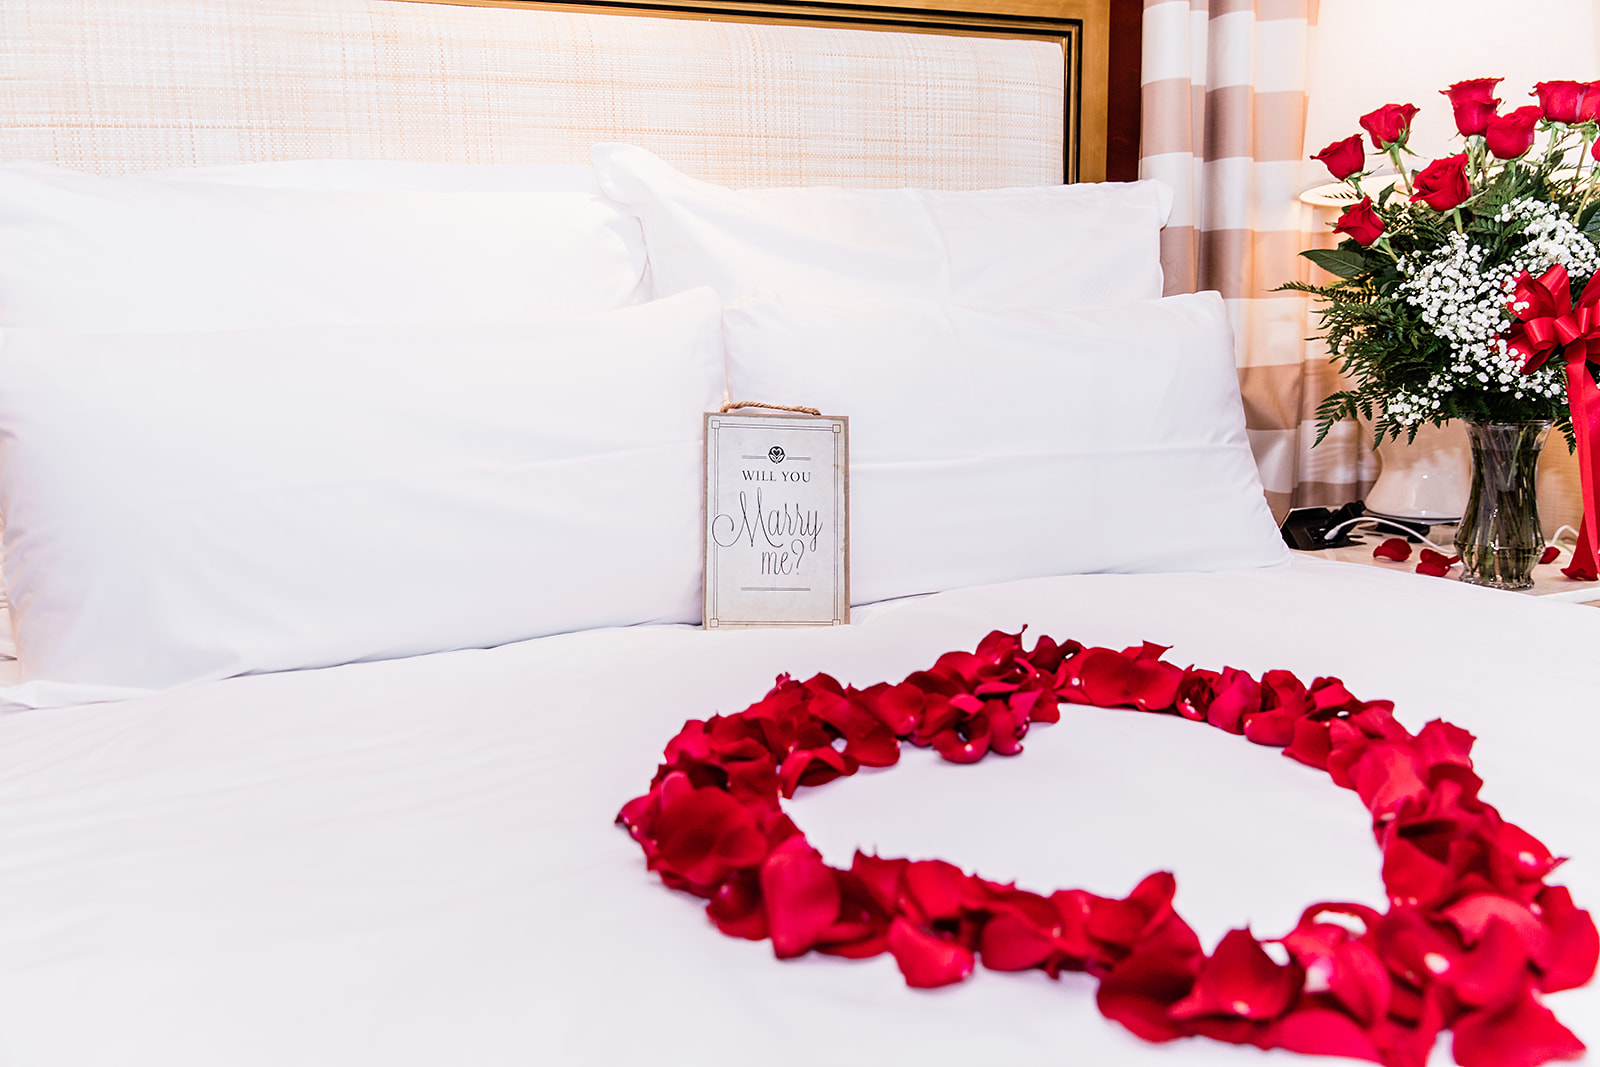 Las Vegas marriage proposal with roses arranged on bed